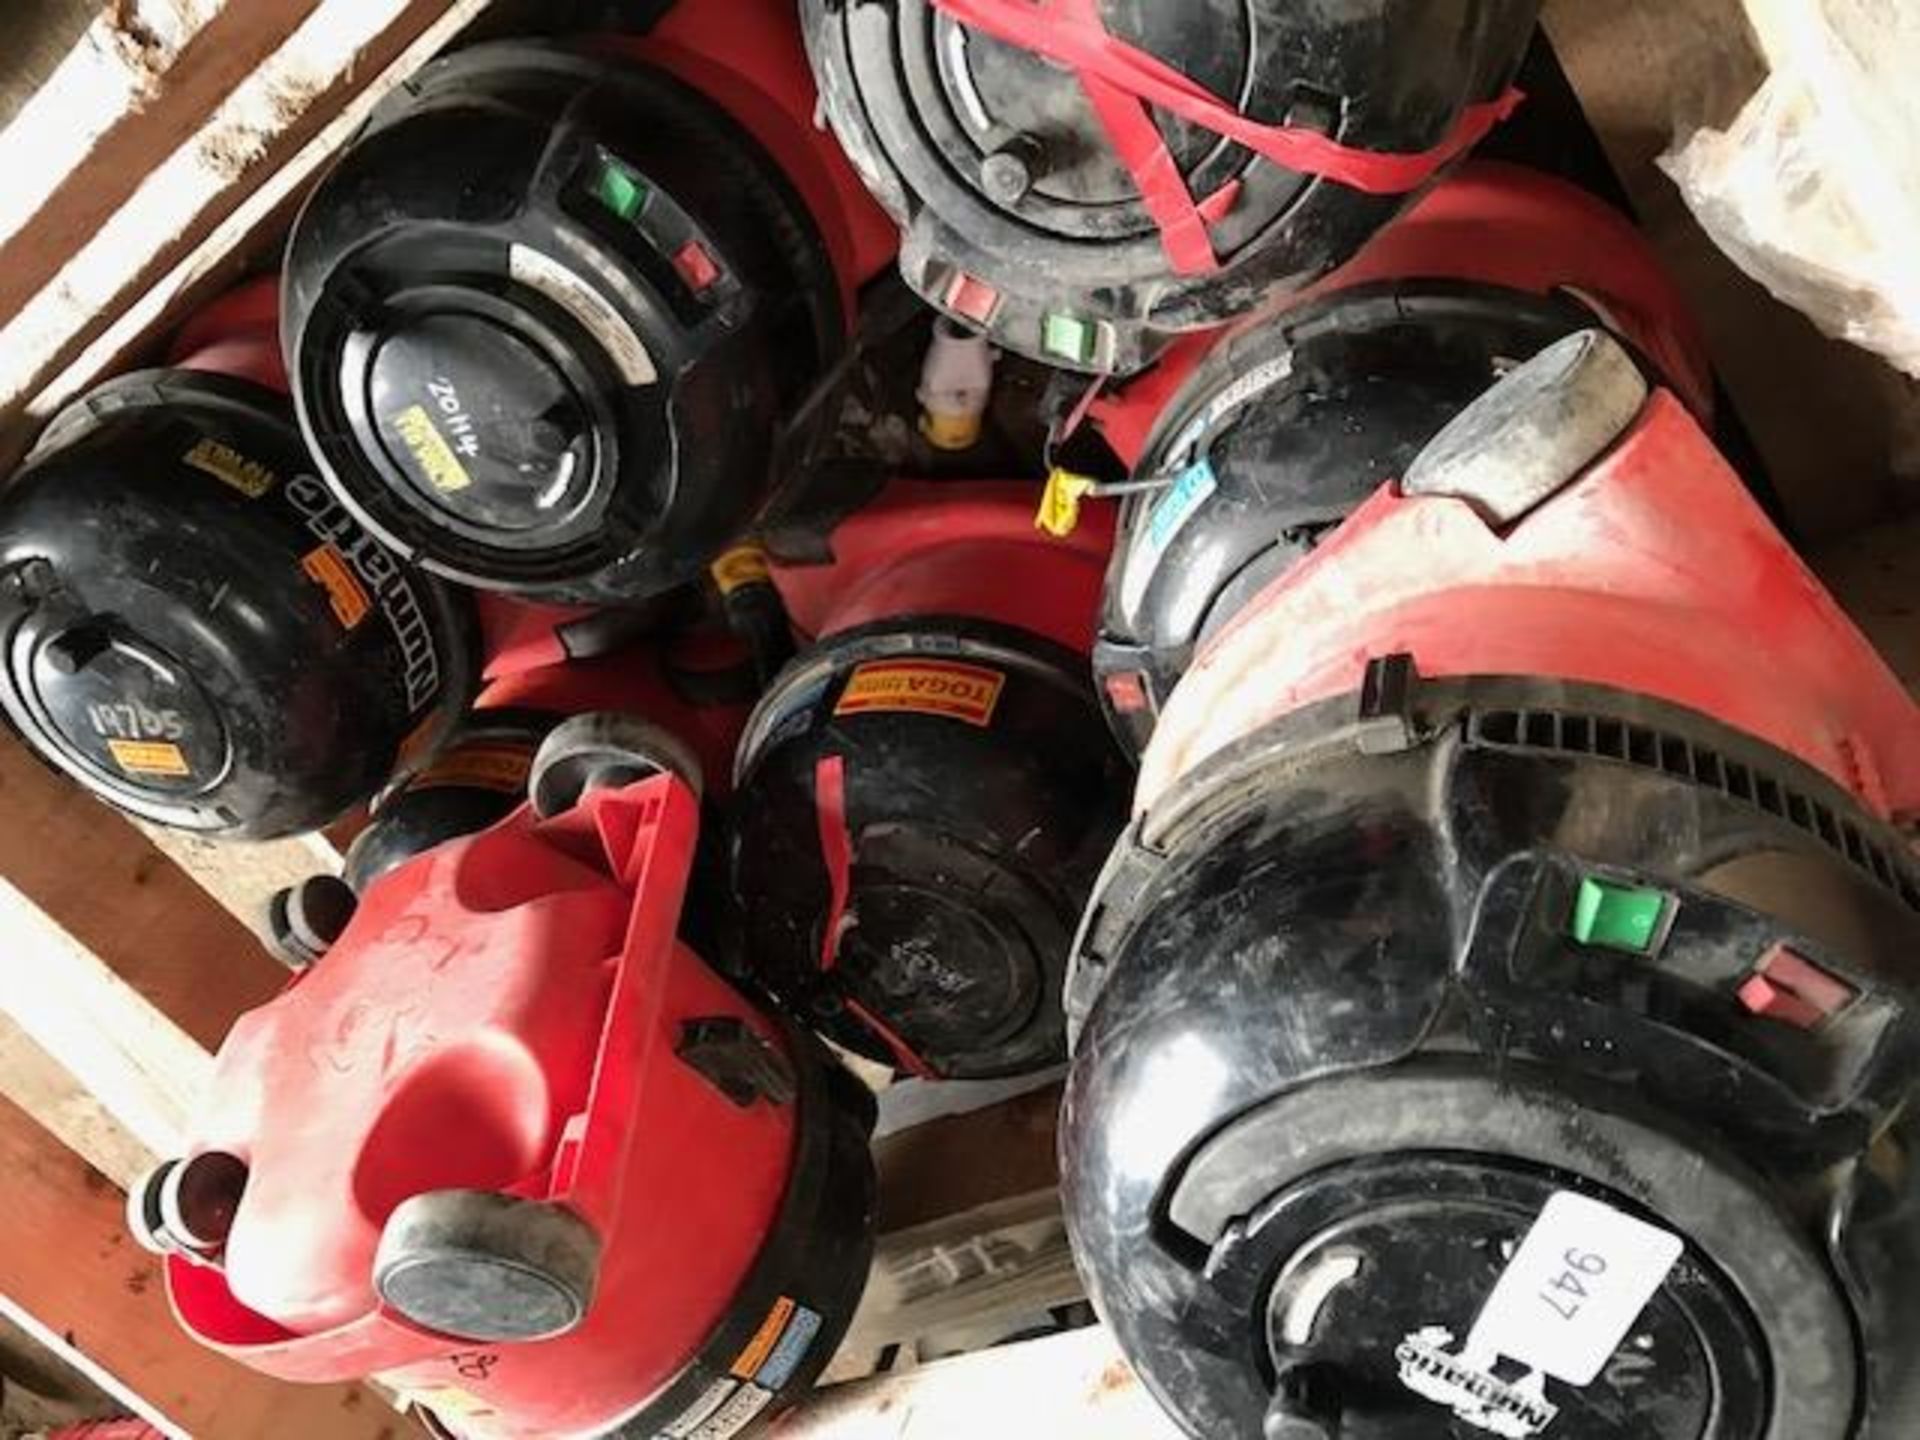 8 X SMALL SIZED 110VOLT HENRY VACUUMS, CONDITION UNKNOWN.